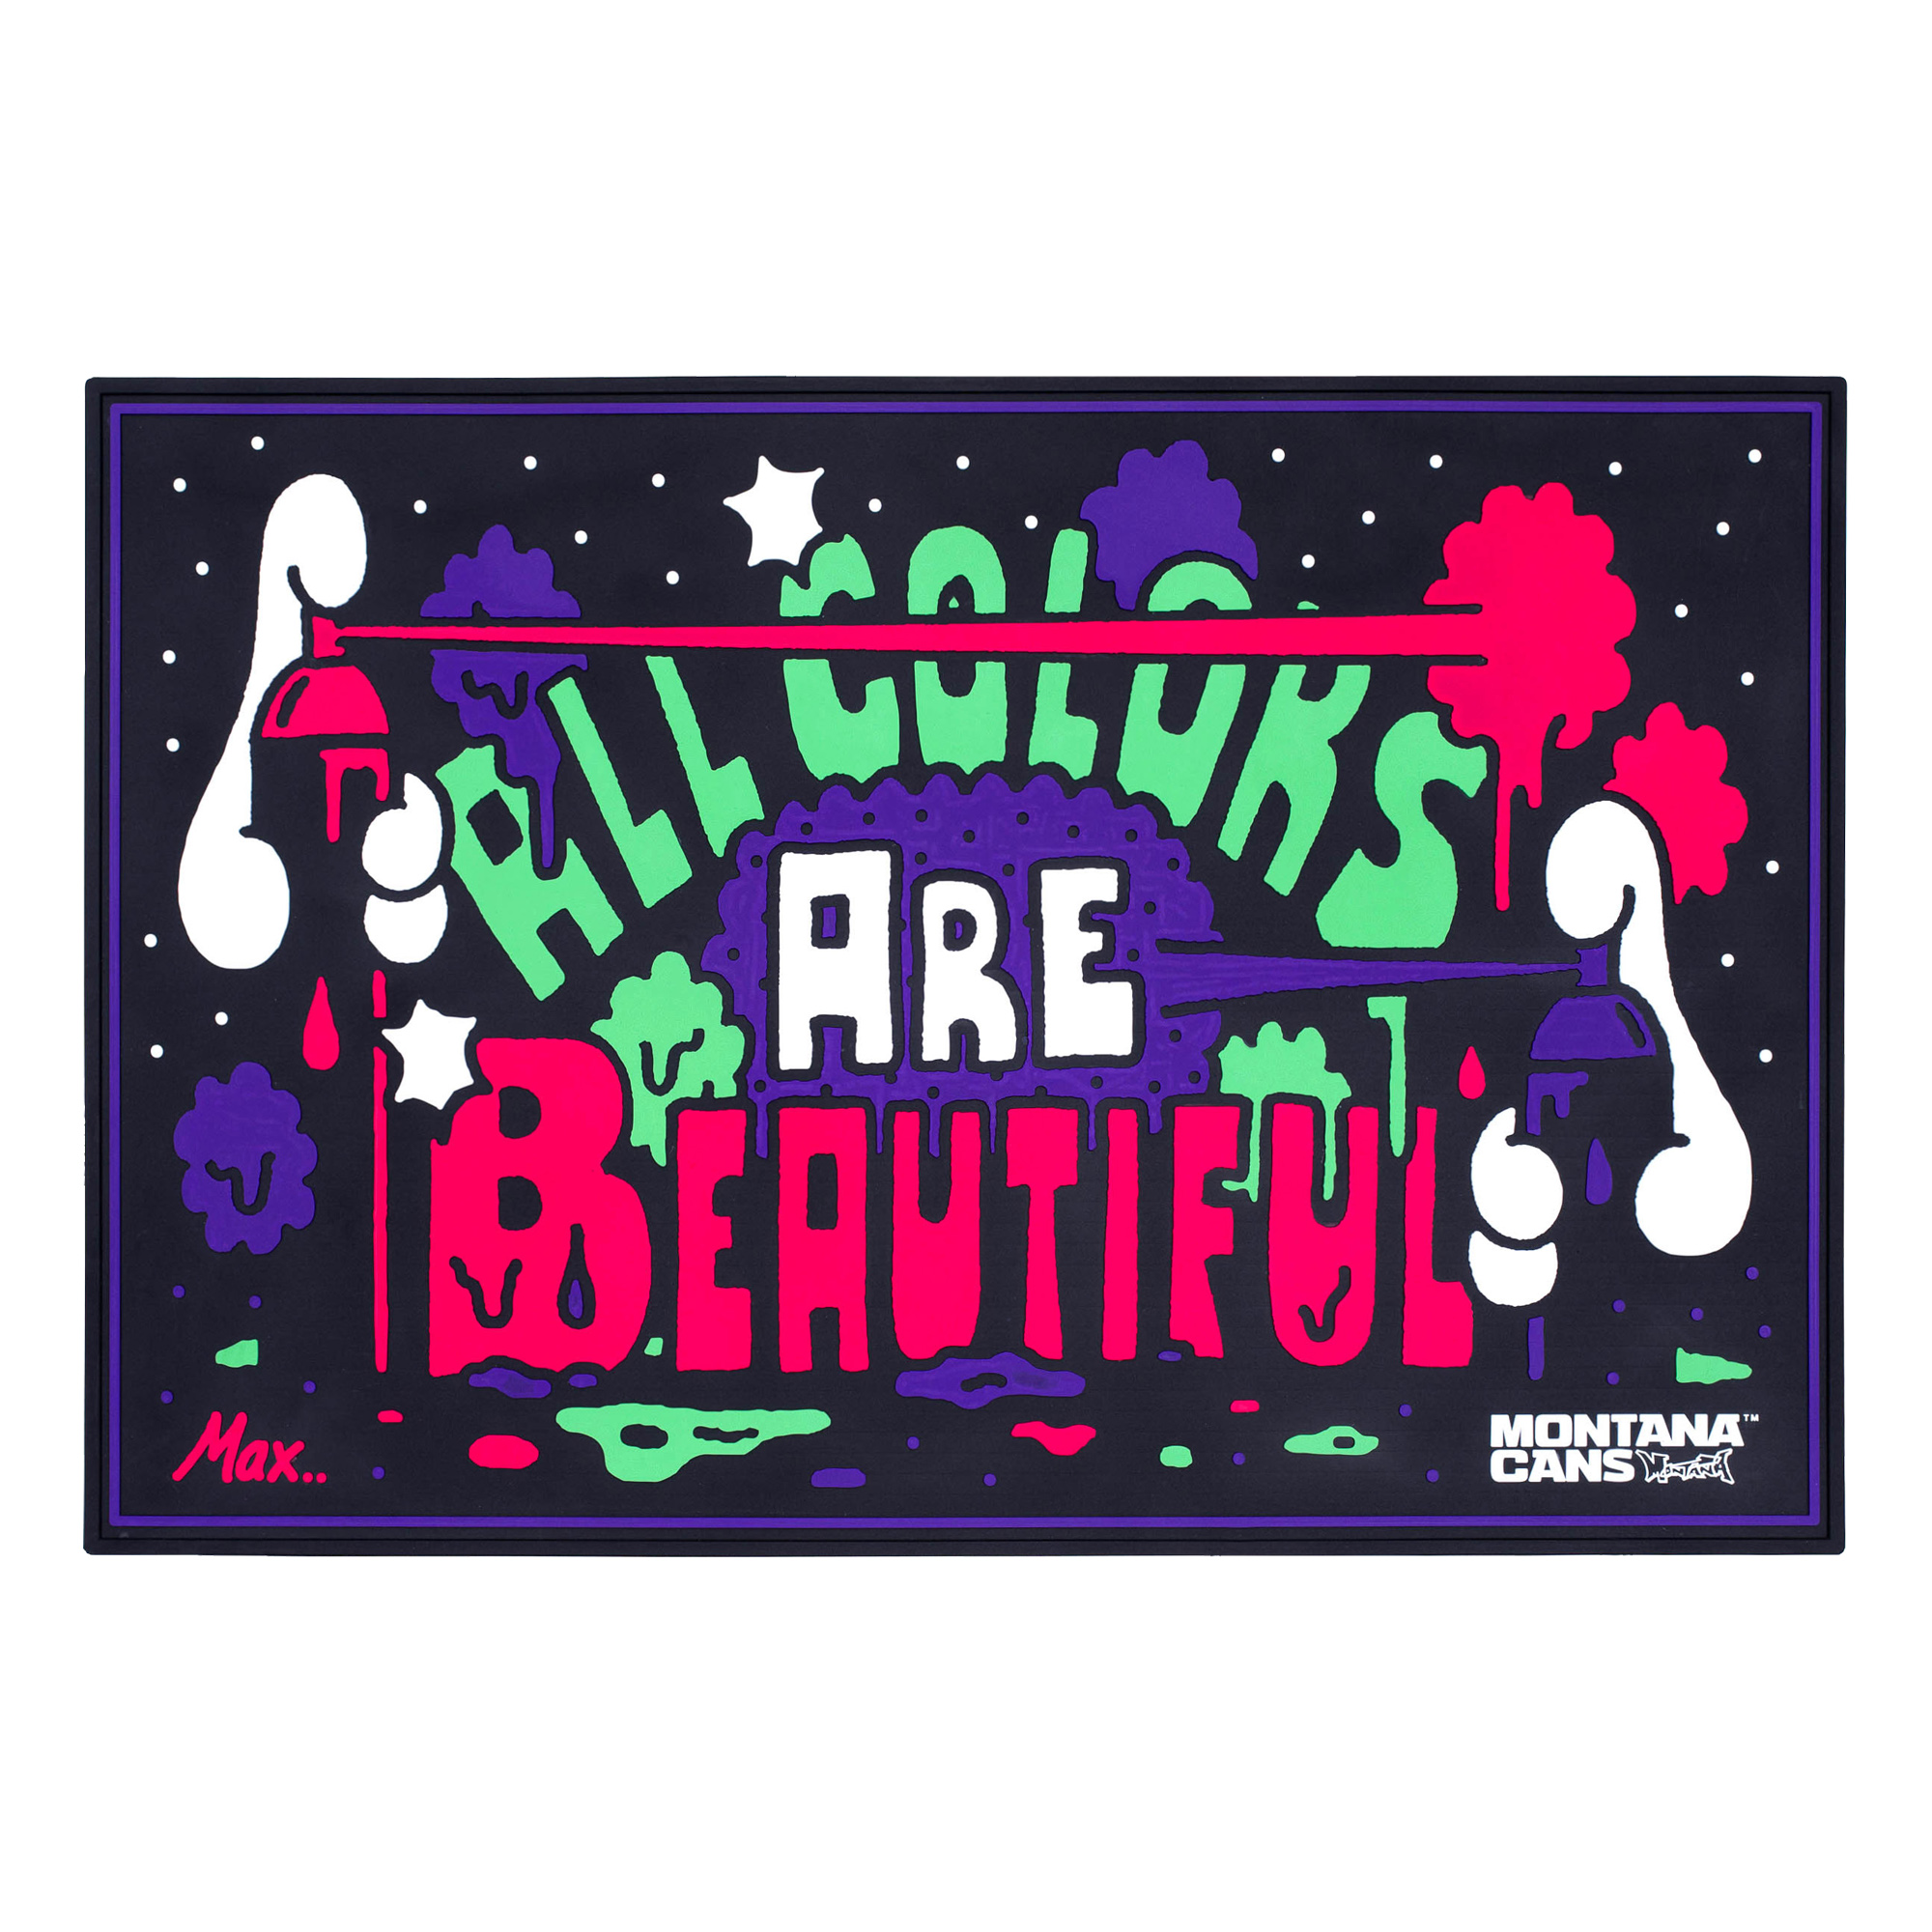 Montana Doormat "ALL COLORS ARE BEAUTIFUL" by Max Solca